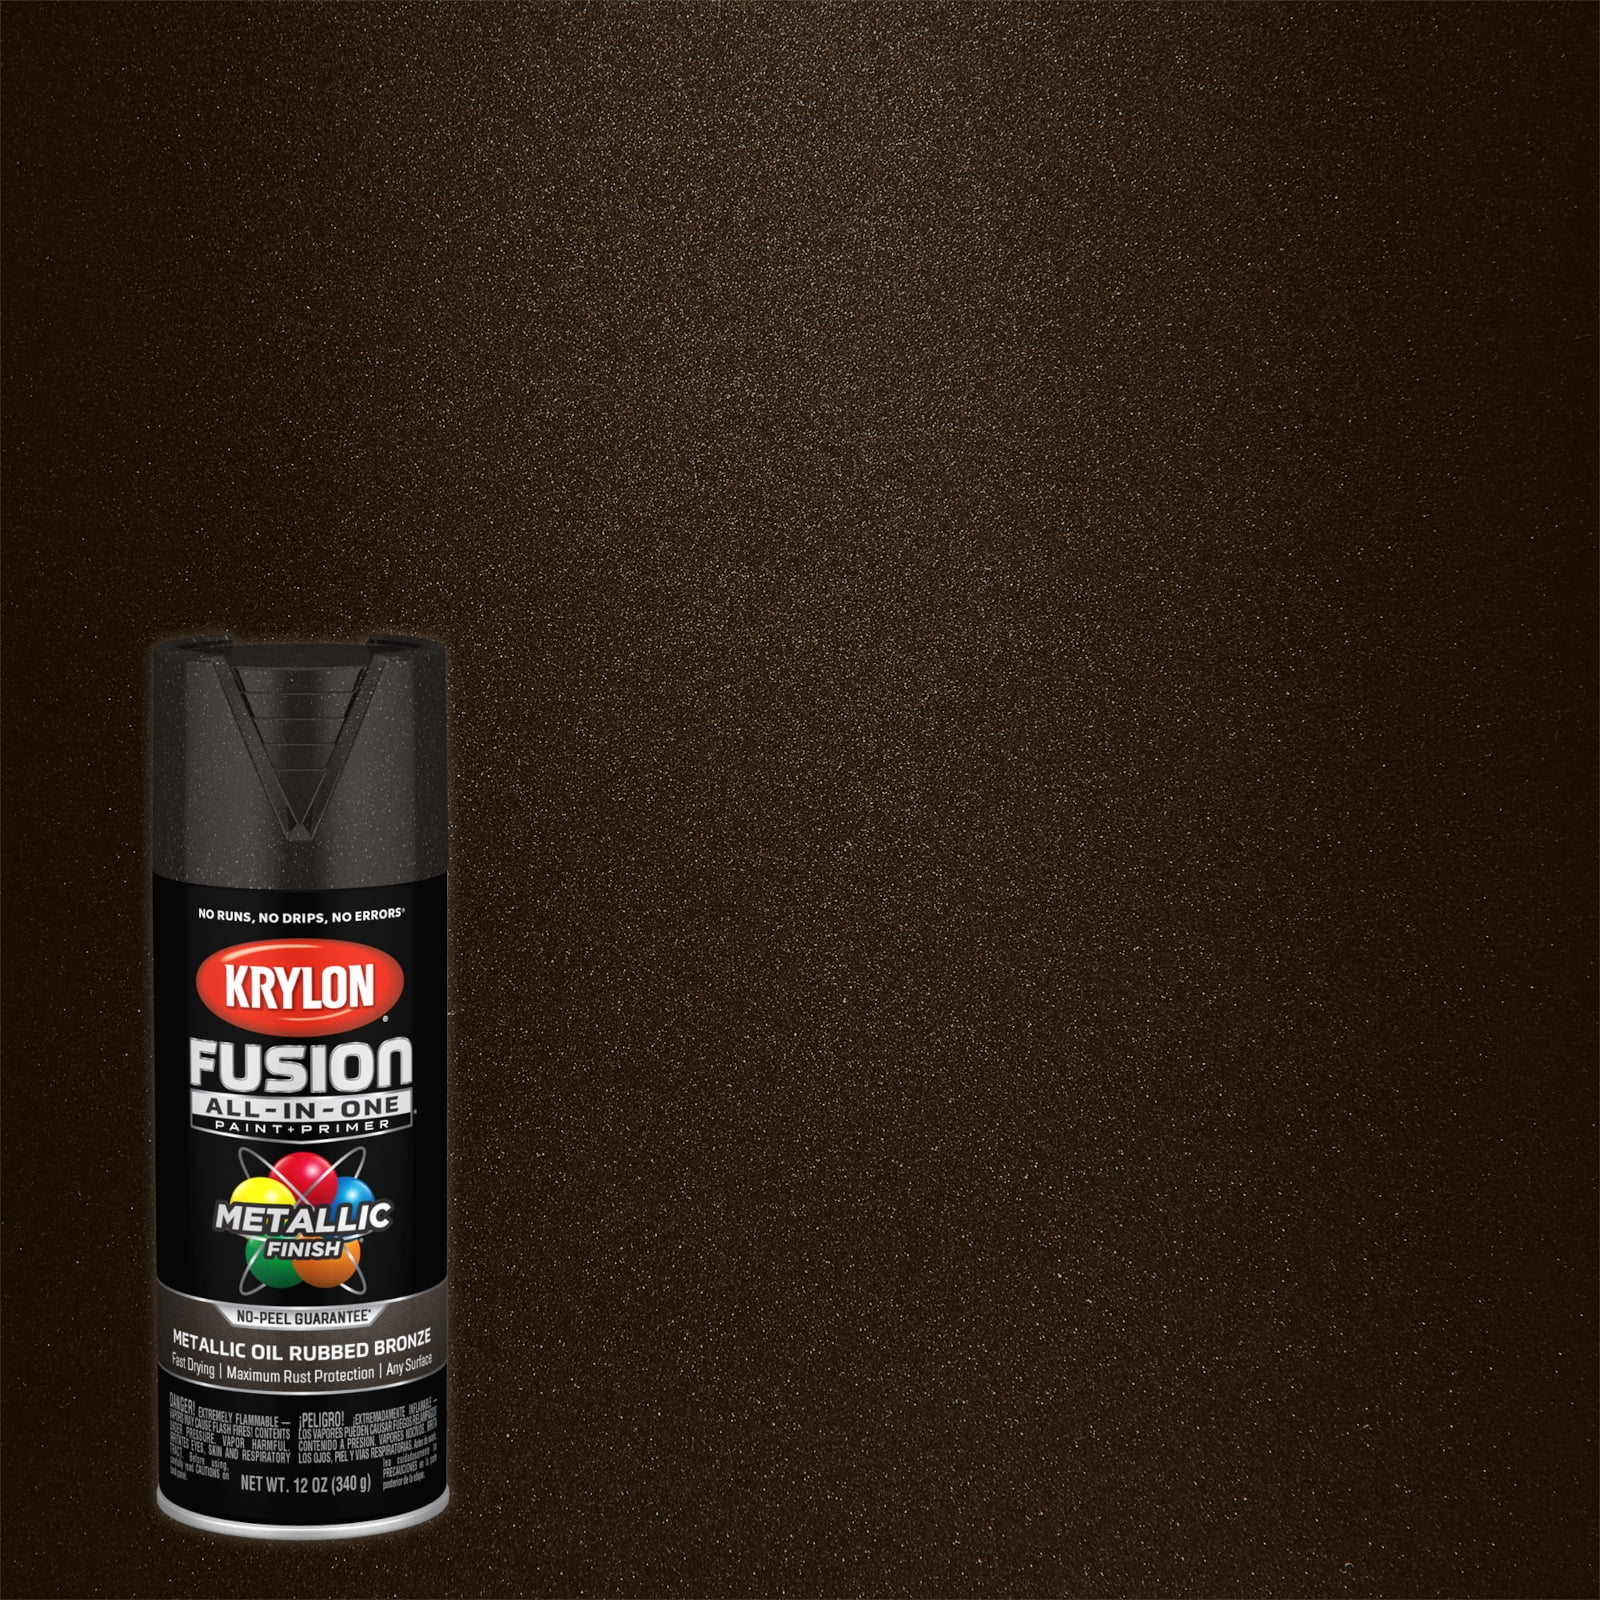 Painting a Perfect Oil-Rubbed Bronze Finish